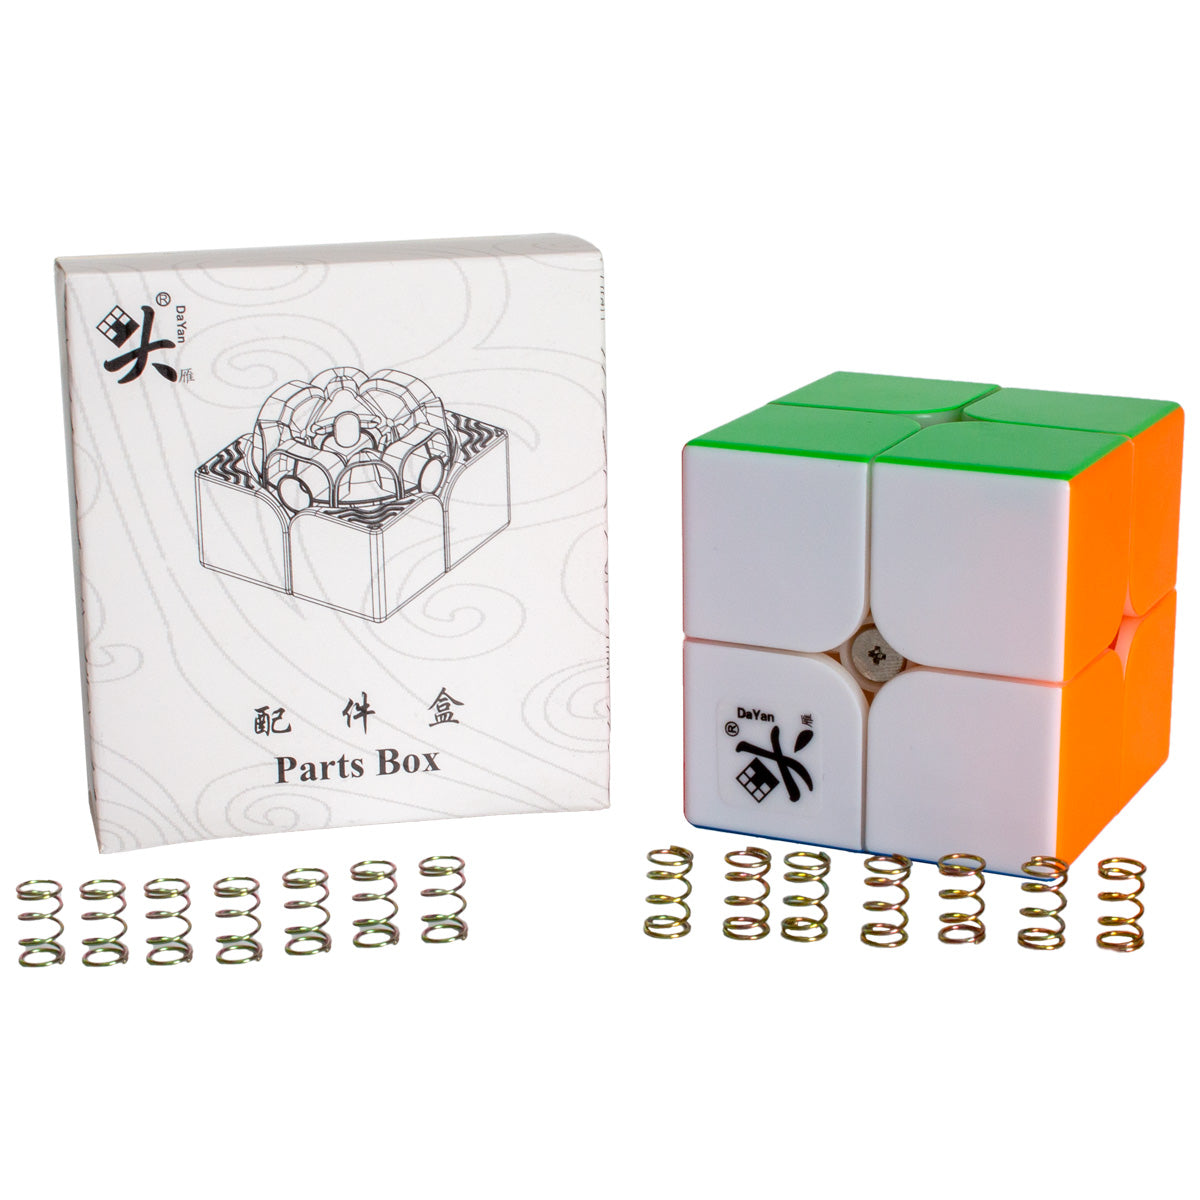 2x2 Speed Cube - Dayan TengYun M on a white background with parts box and springs in front